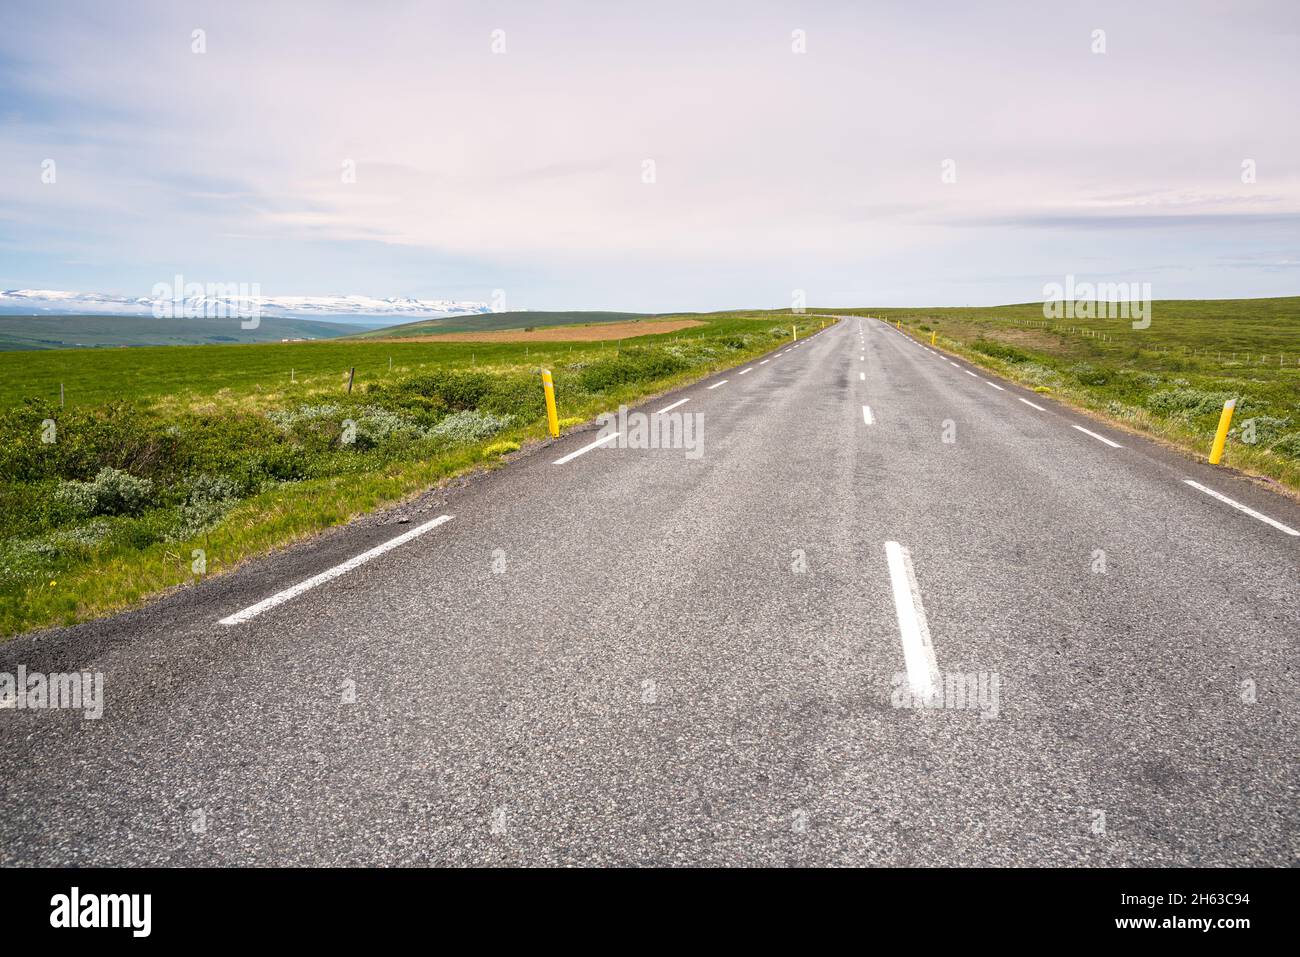 Deserted road through the countryside on a cloudy summer day Stock Photo